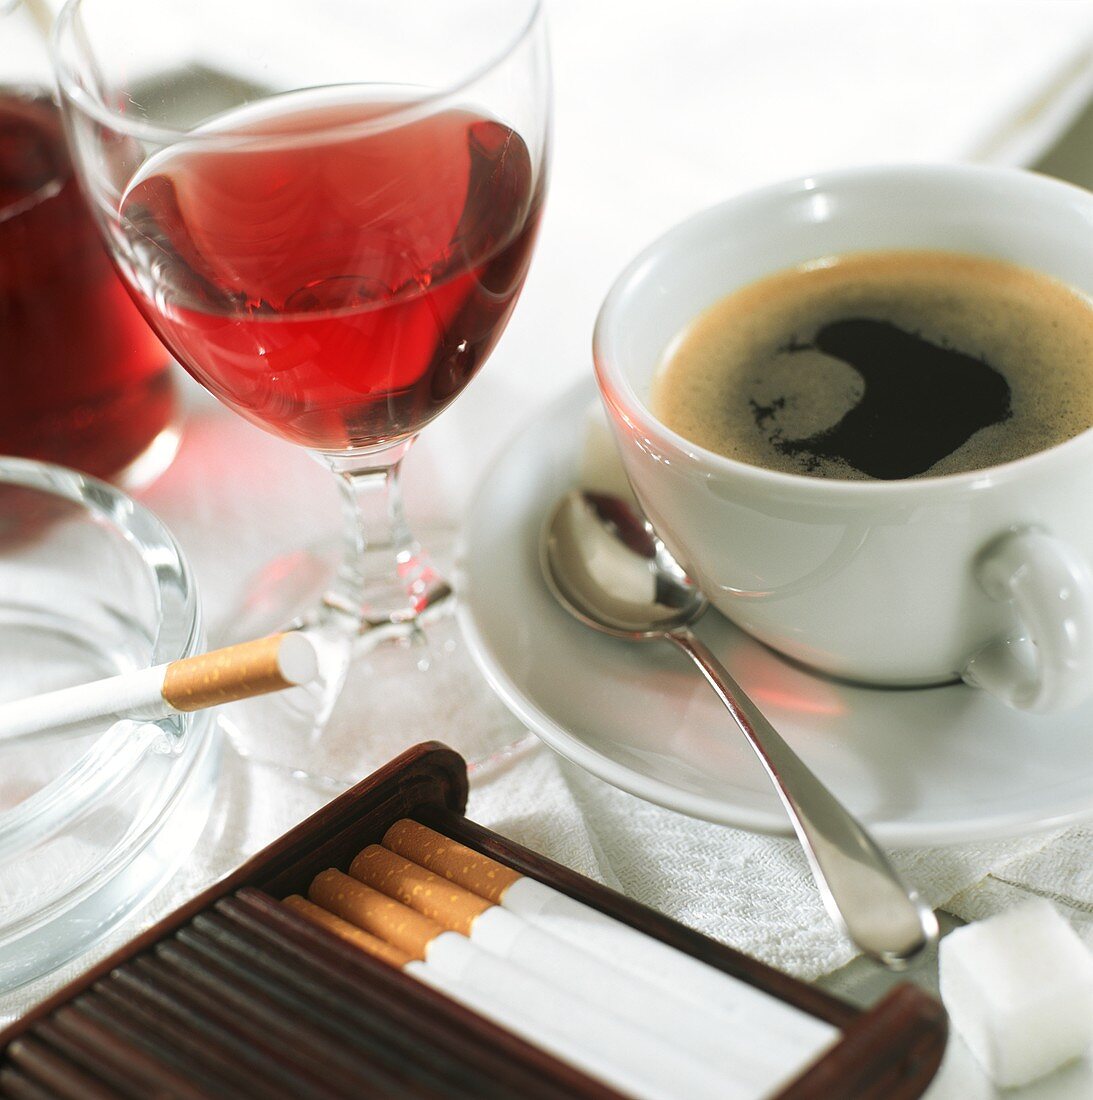 Luxury items: cigarettes, coffee and rose wine